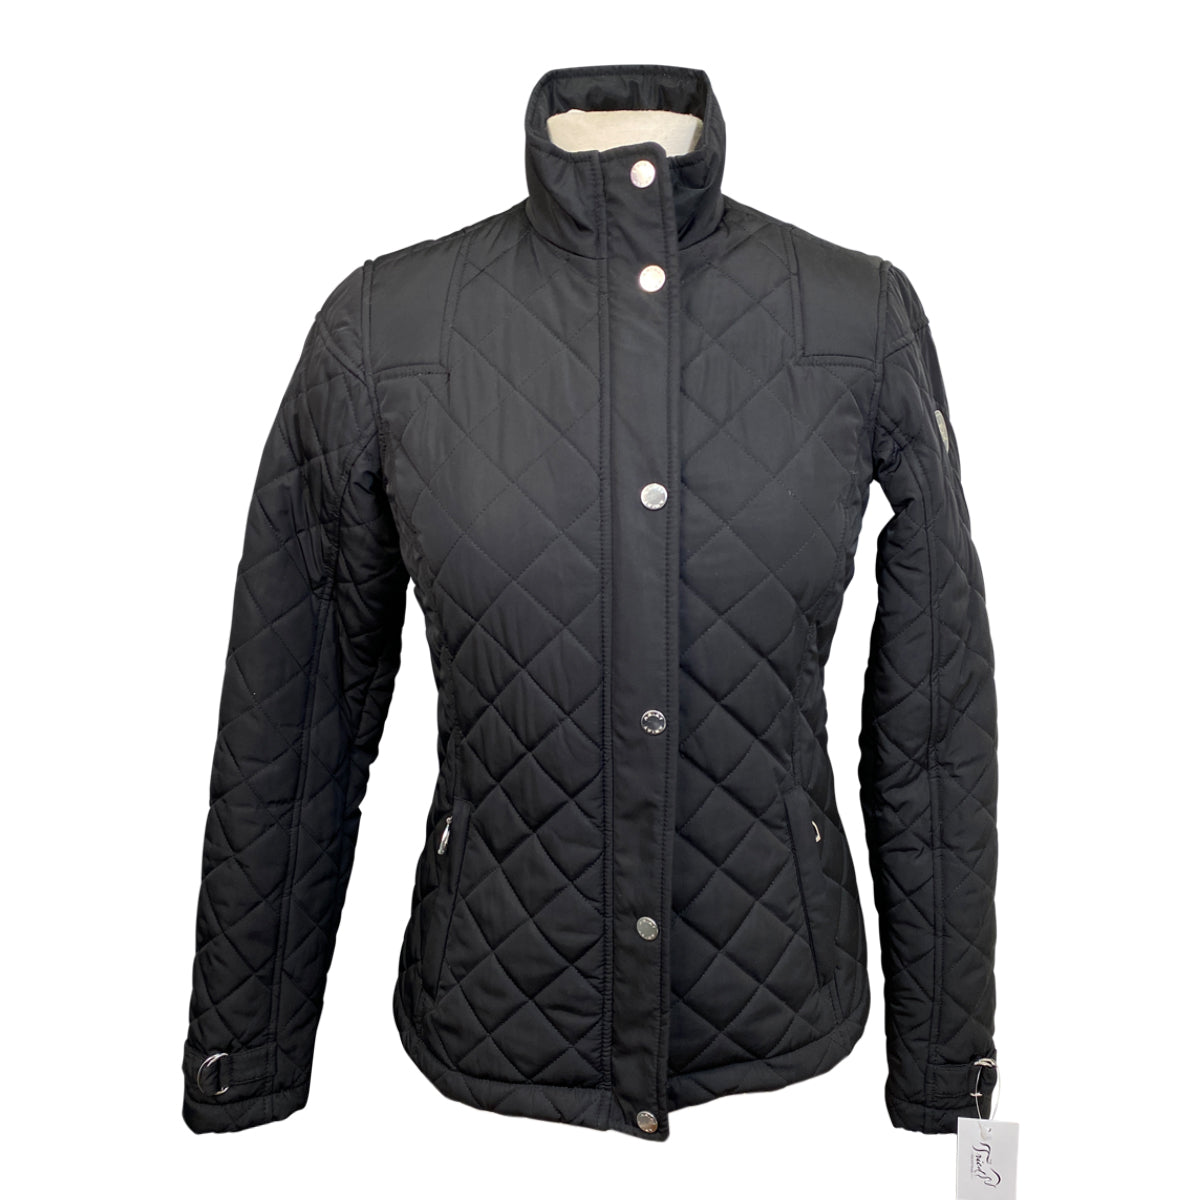 Ariat Quilted Jacket in Black